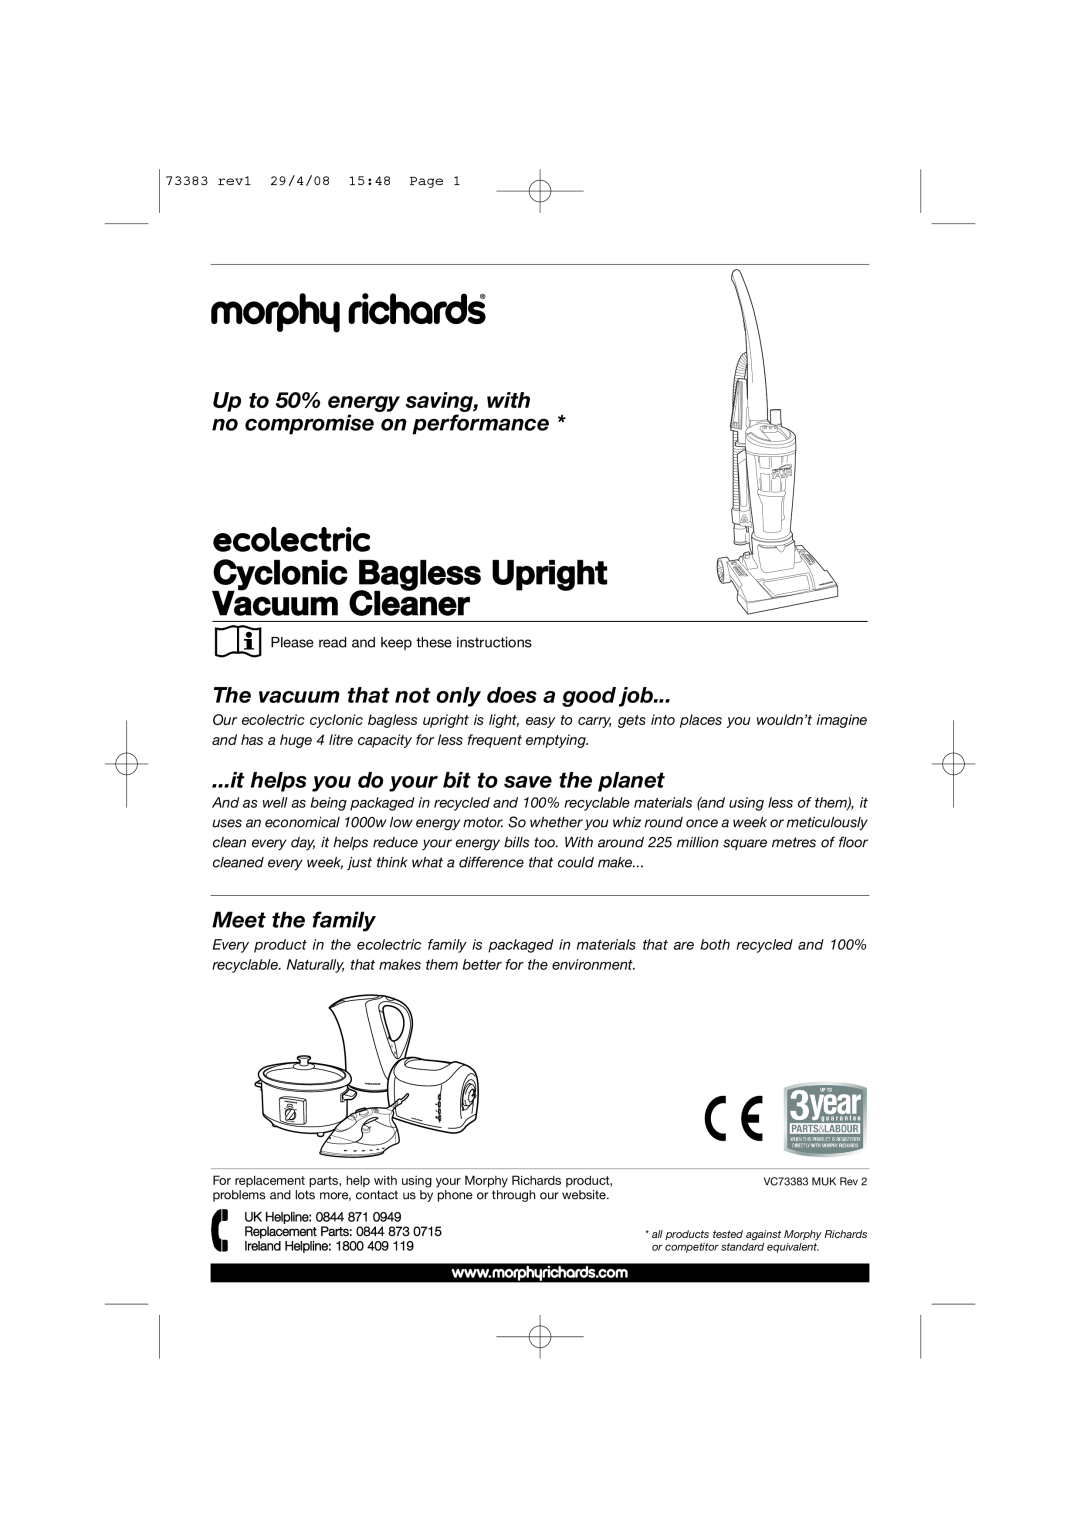 Morphy Richards 73383 manual Cyclonic Bagless Upright Vacuum Cleaner, The vacuum that not only does a good job 